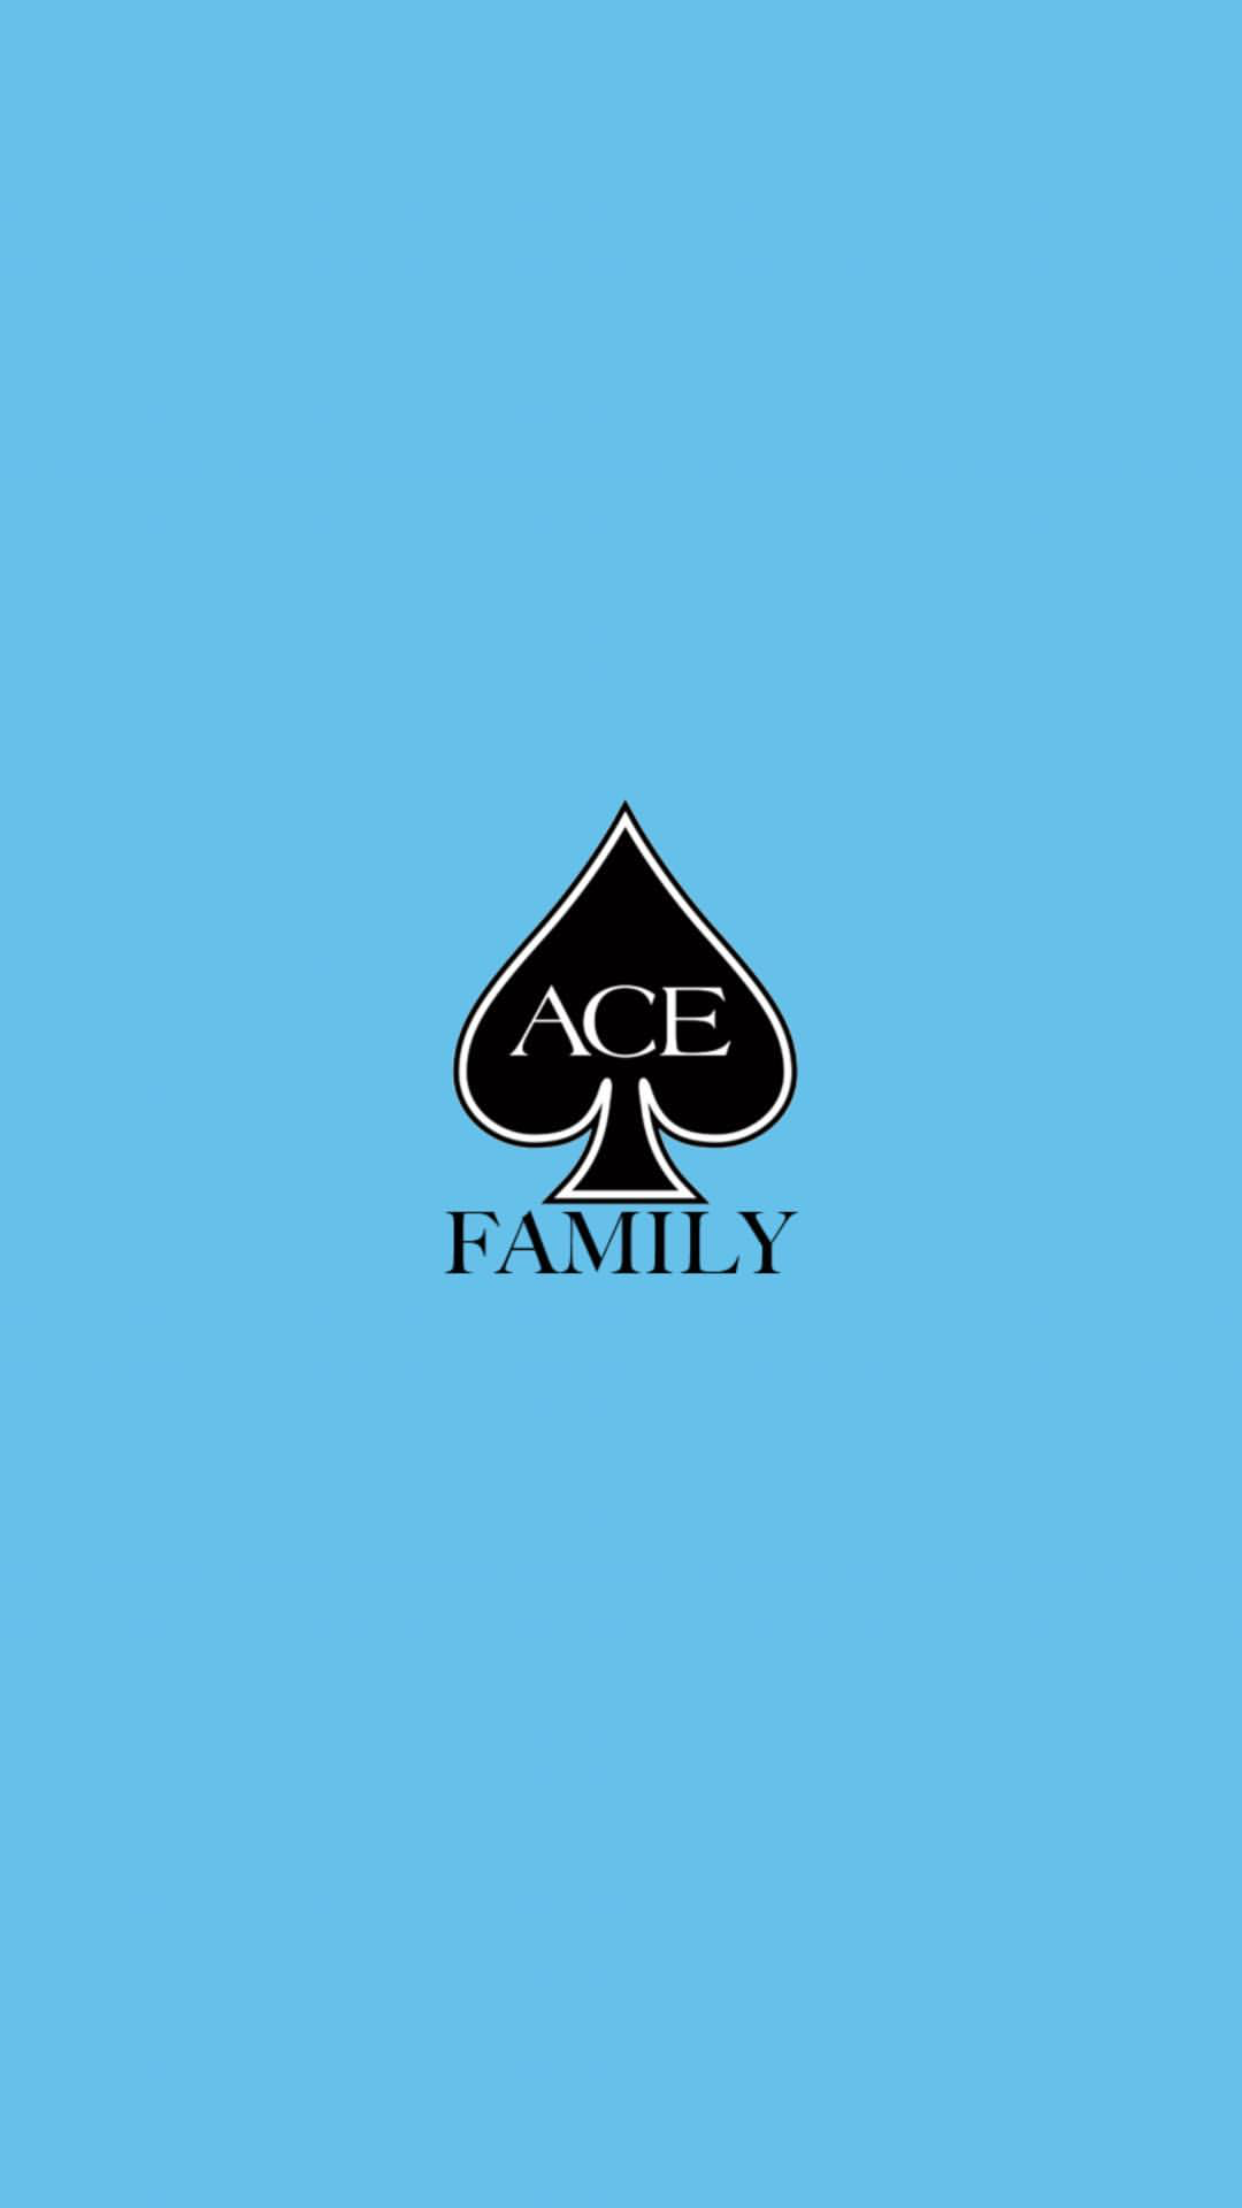 If you are a ACA family members you would love this for wallpaper on your phone. Ace family wallpaper, Ace family, The ace family youtube